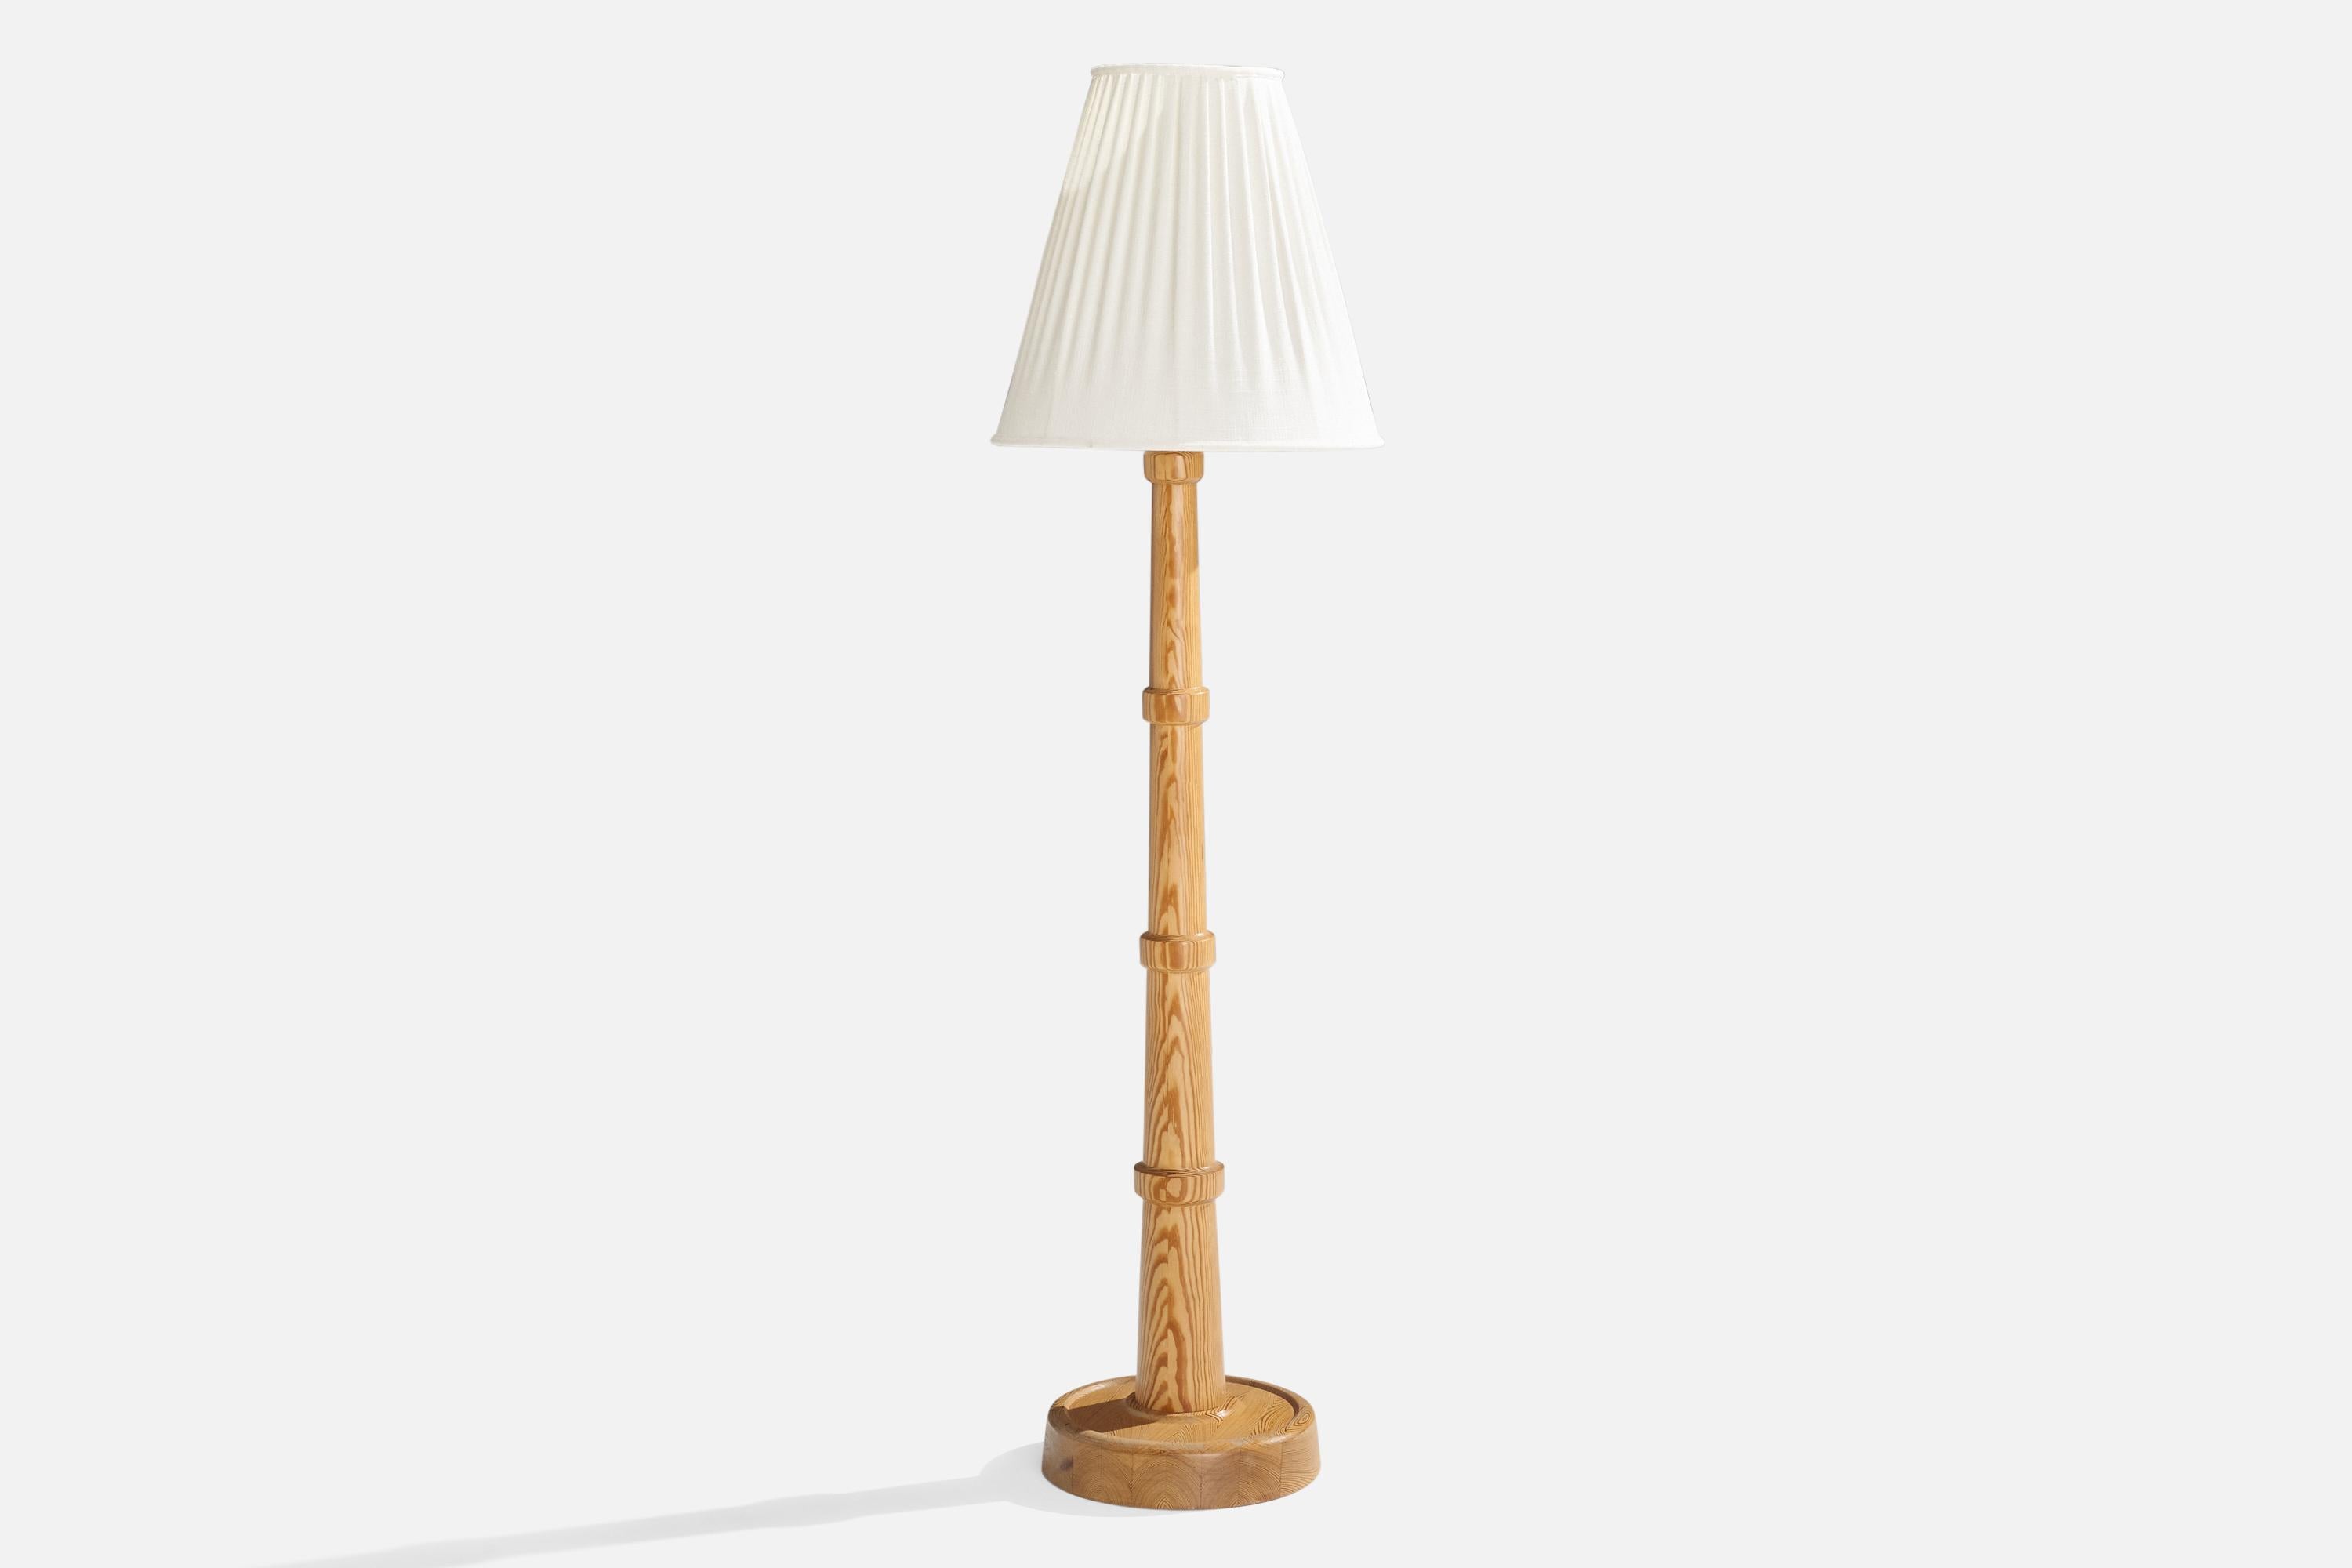 A pine floor lamp designed and produced in Sweden, c. 1960s.

Overall Dimensions (inches): 51.25” H x 14” W x 14.25” D
Stated dimensions include shade.
Bulb Specifications: E-26 Bulb
Number of Sockets: 1
All lighting will be converted for US usage.